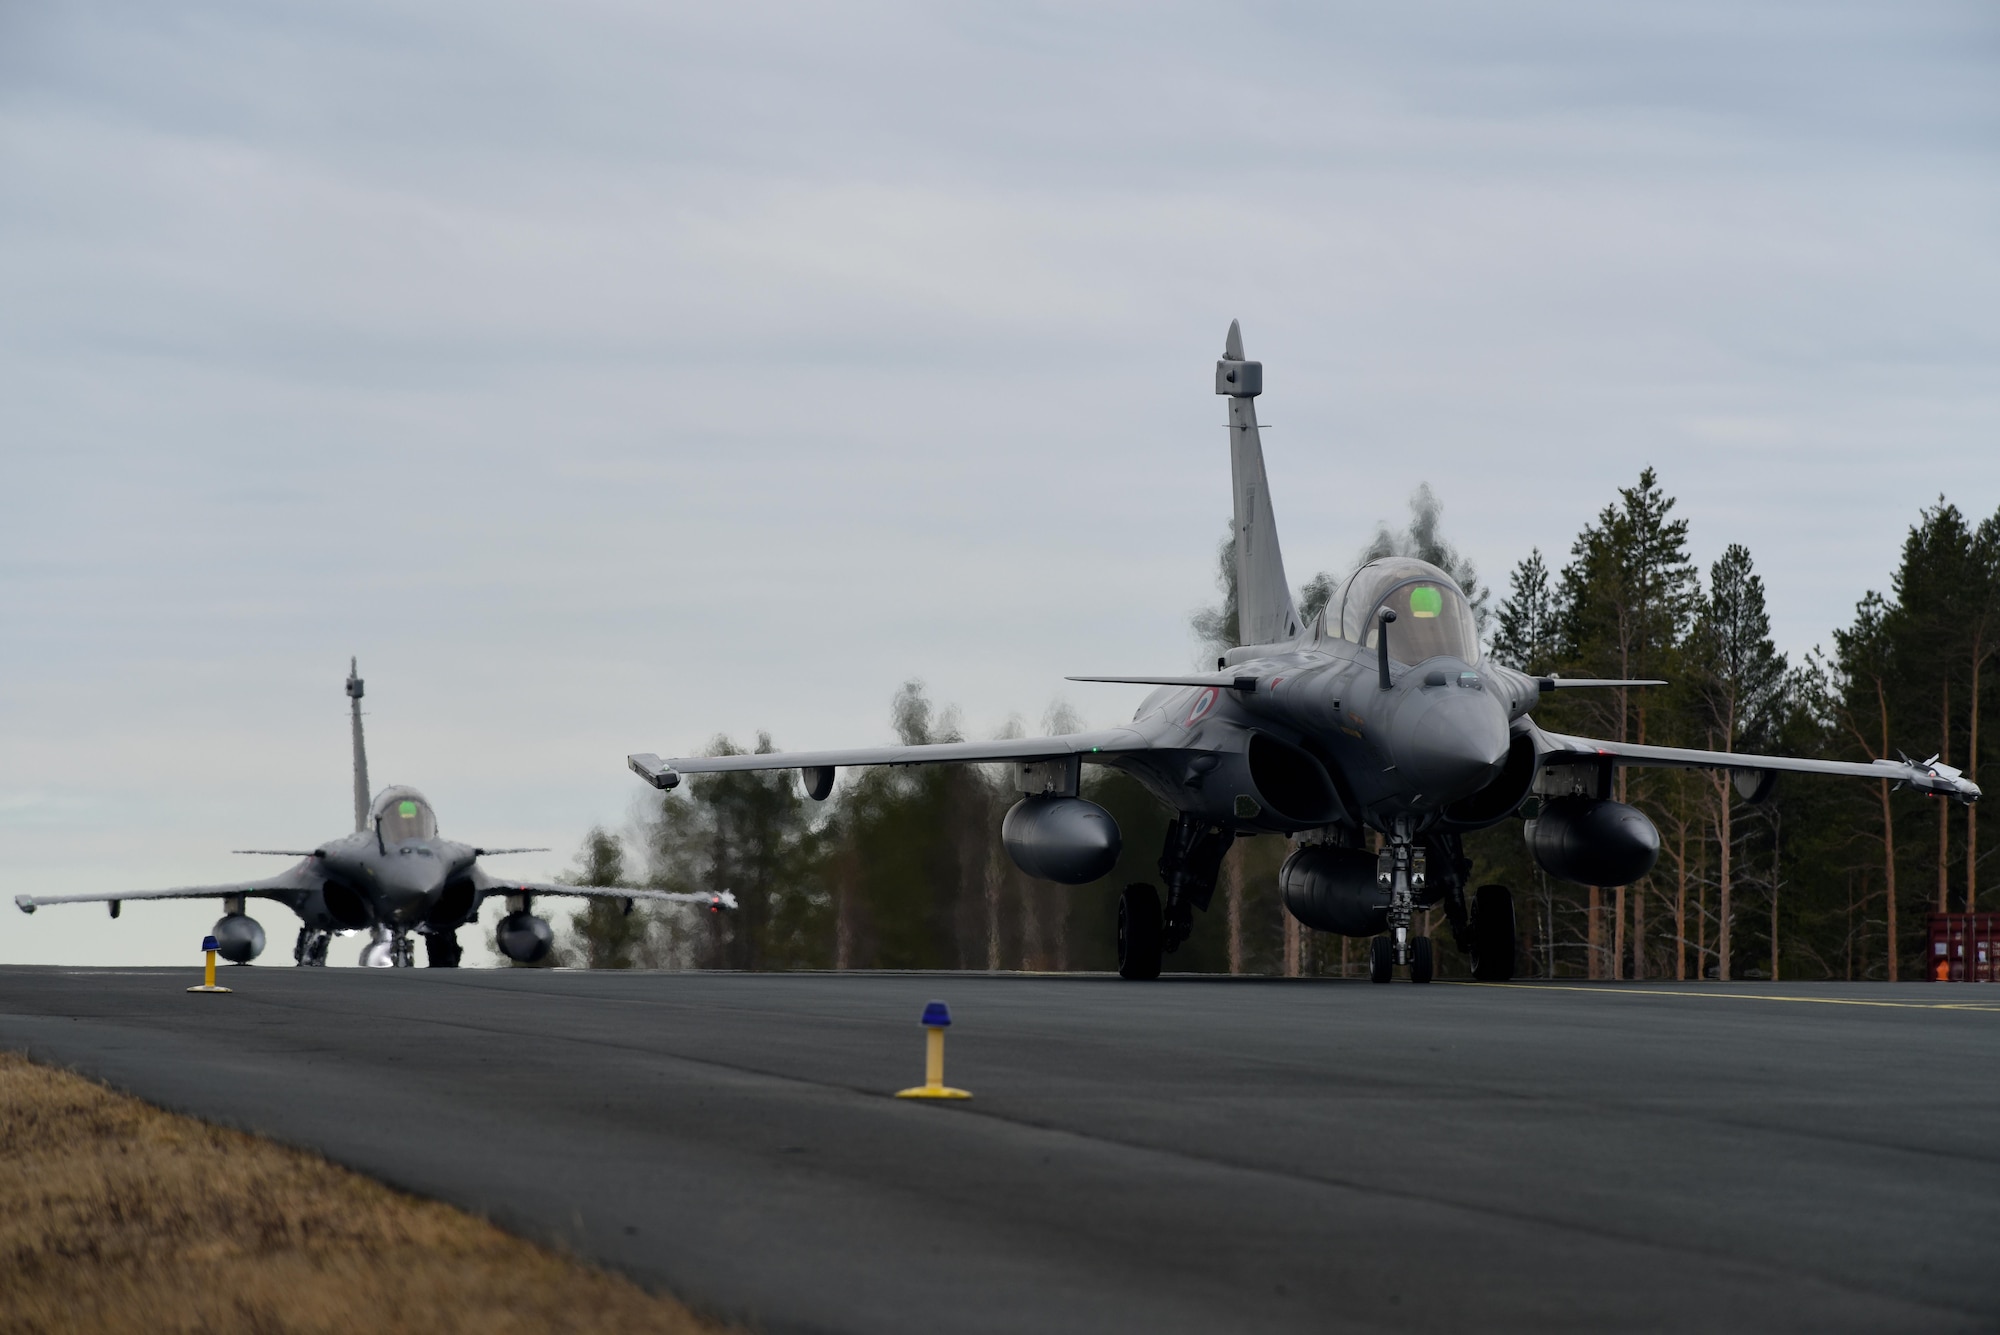 Two French Rafale aircraft taxi to a runway at Rovaniemi Air Base, Finland, May 22, in support of Arctic Challenge 2017. The French are training alongside the U.S. and other allies and partners in Europe, in an effort to maintain the relationships and trust that are essential for ensuring regional security. (U.S. Air Force photo/Airman 1st Class Abby L. Finkel)